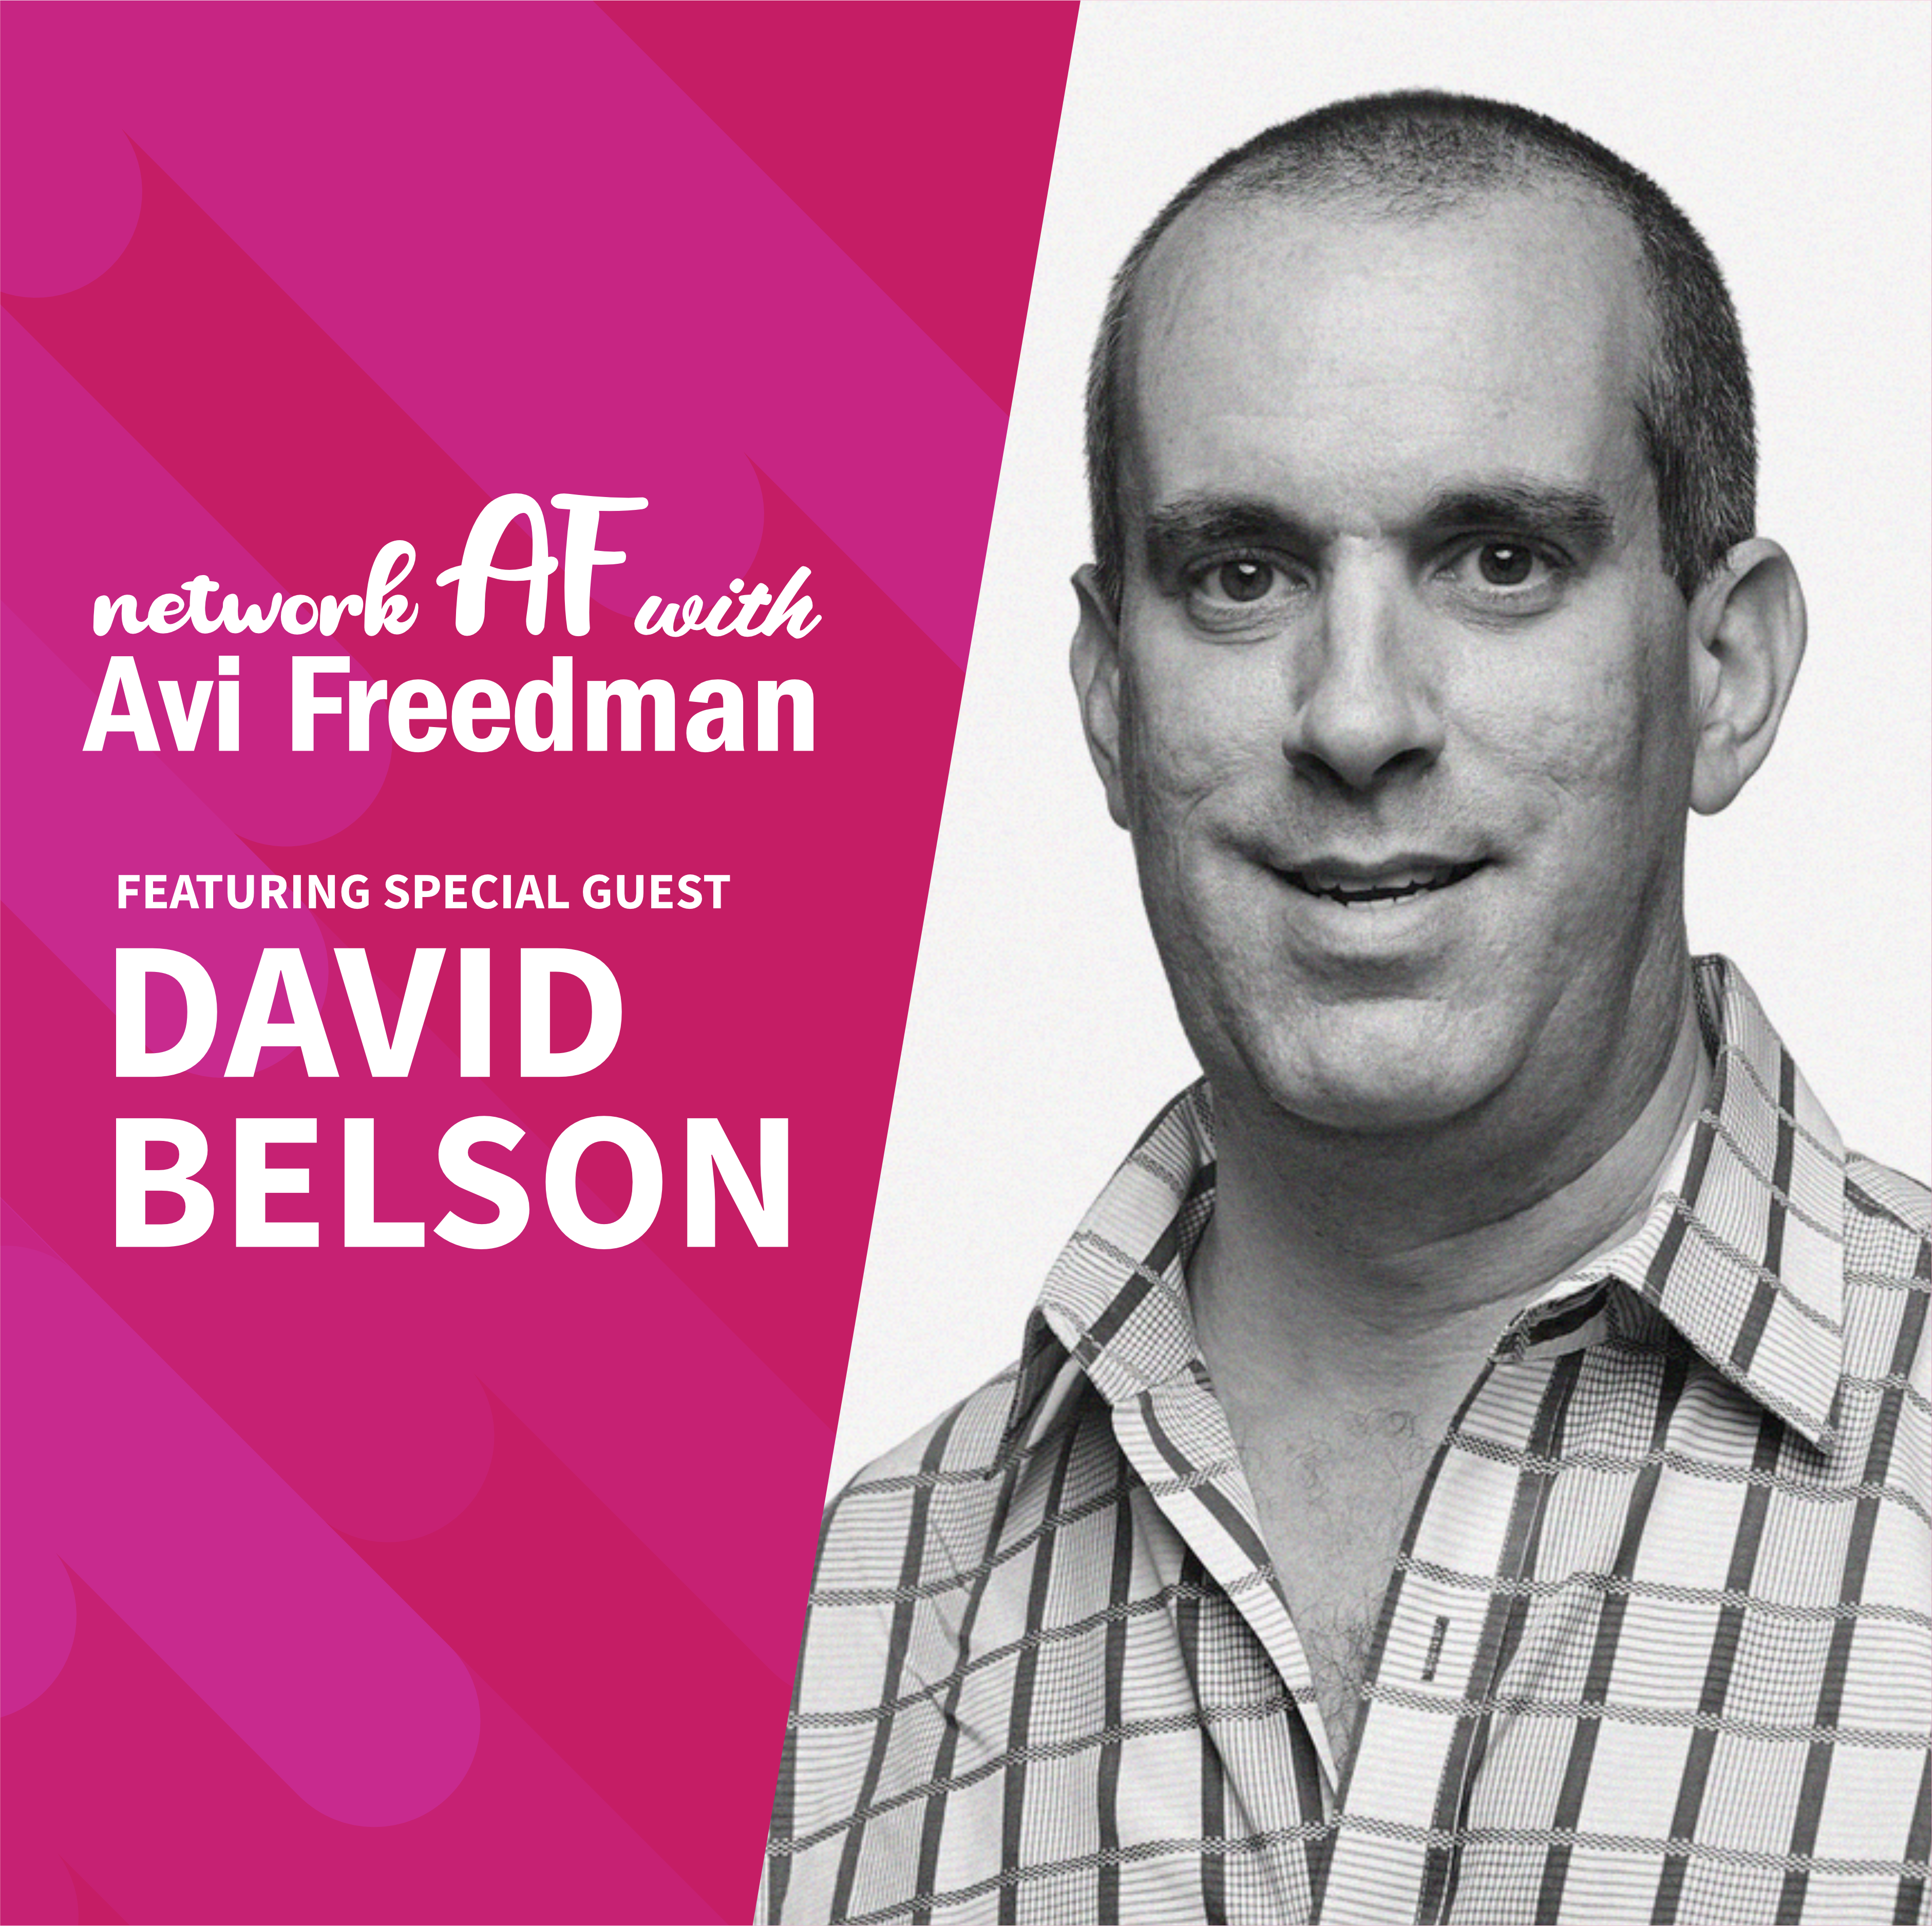 Understanding data analysis and online activity with David Belson